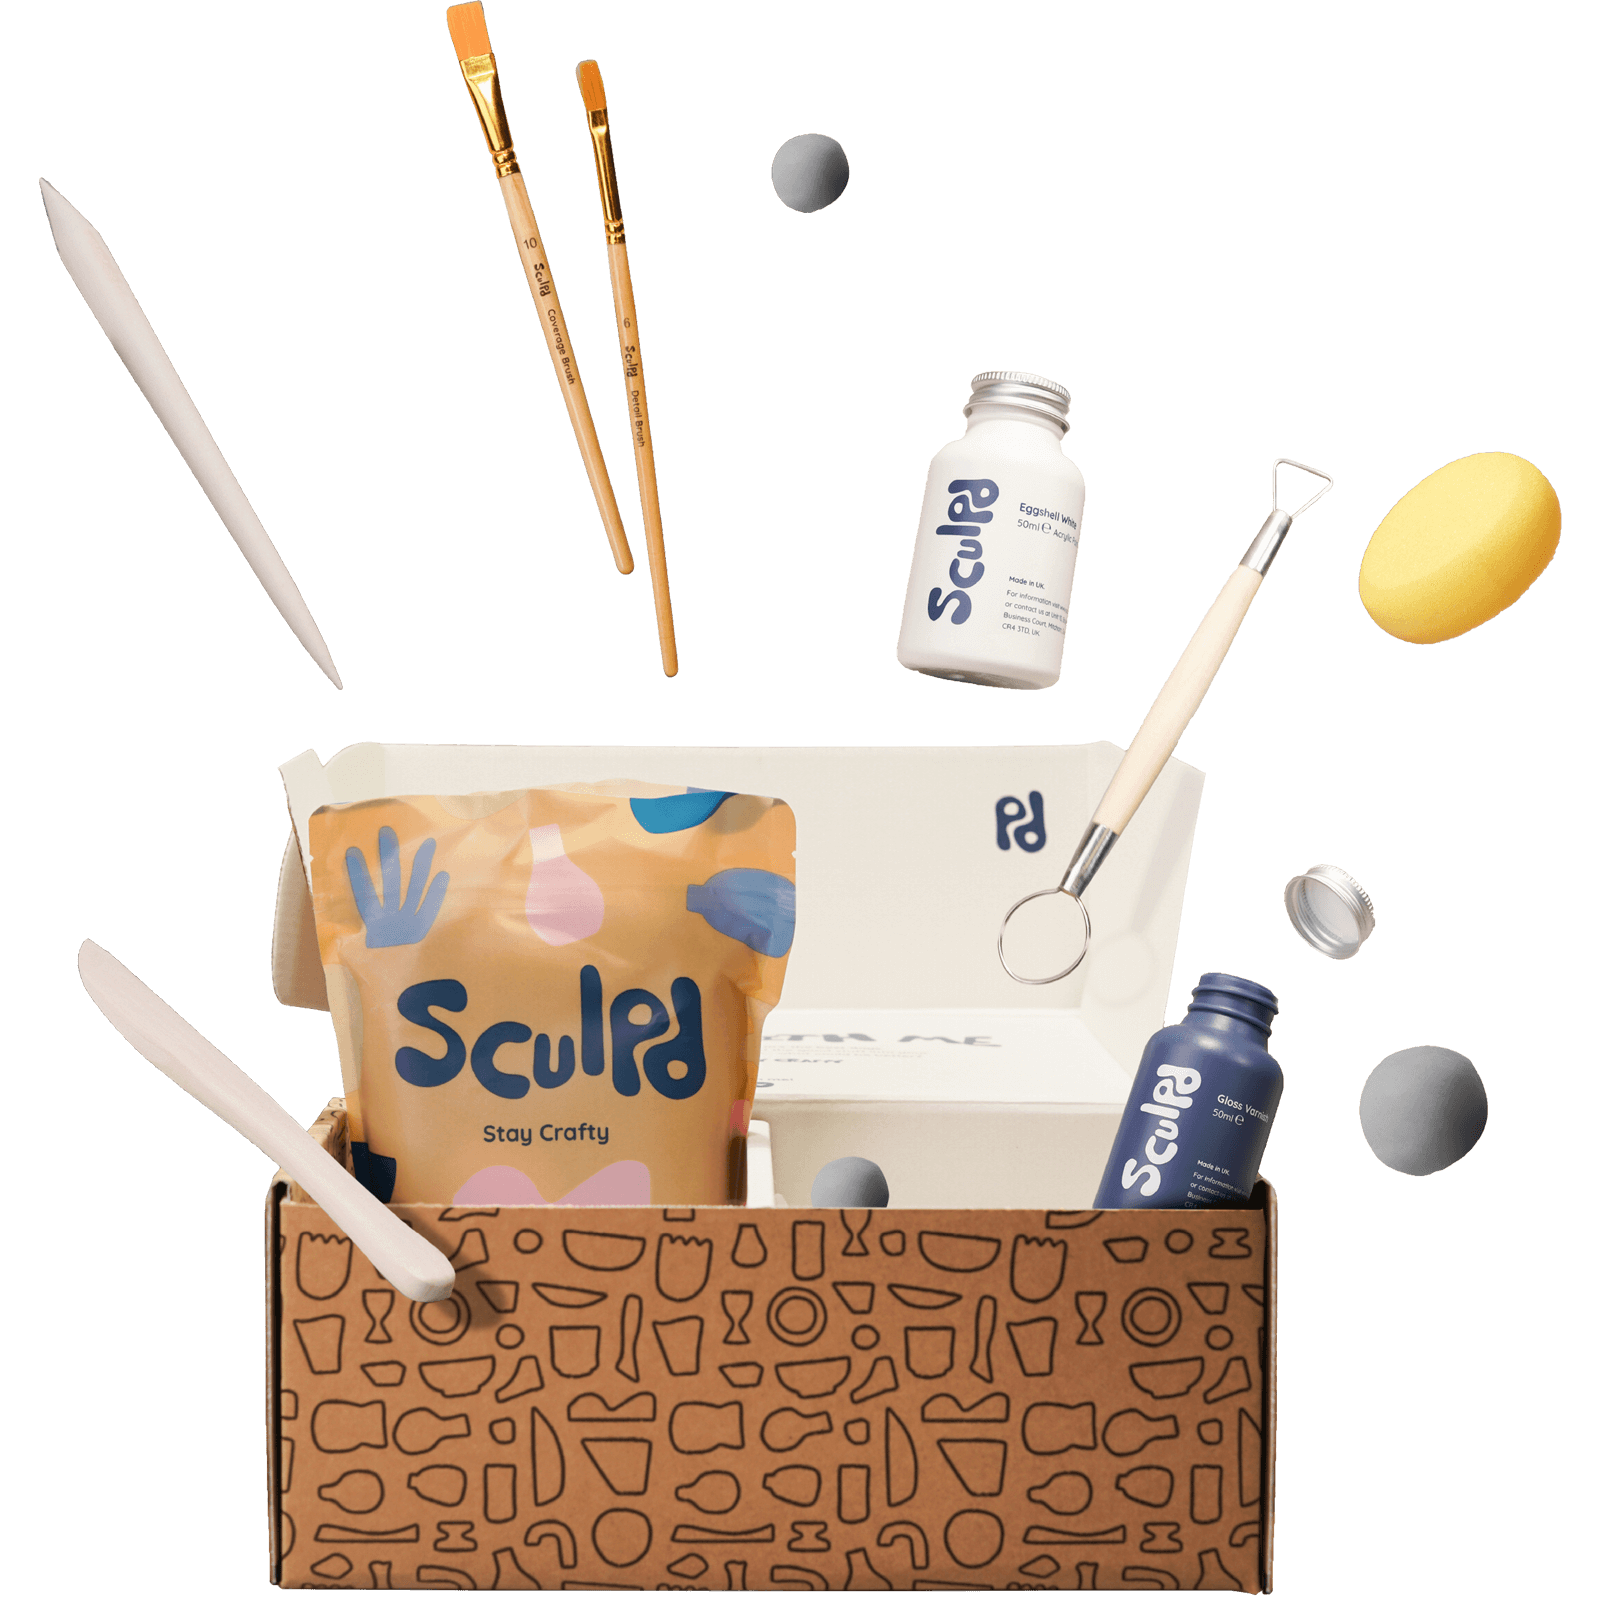 Sculpd Pottery Starter Kit for Beginners - Includes Matte Varnish, Tool  Set, Paintbrushes, and Step-by-Step Guide - Air Dry Clay Kit for Two Adults